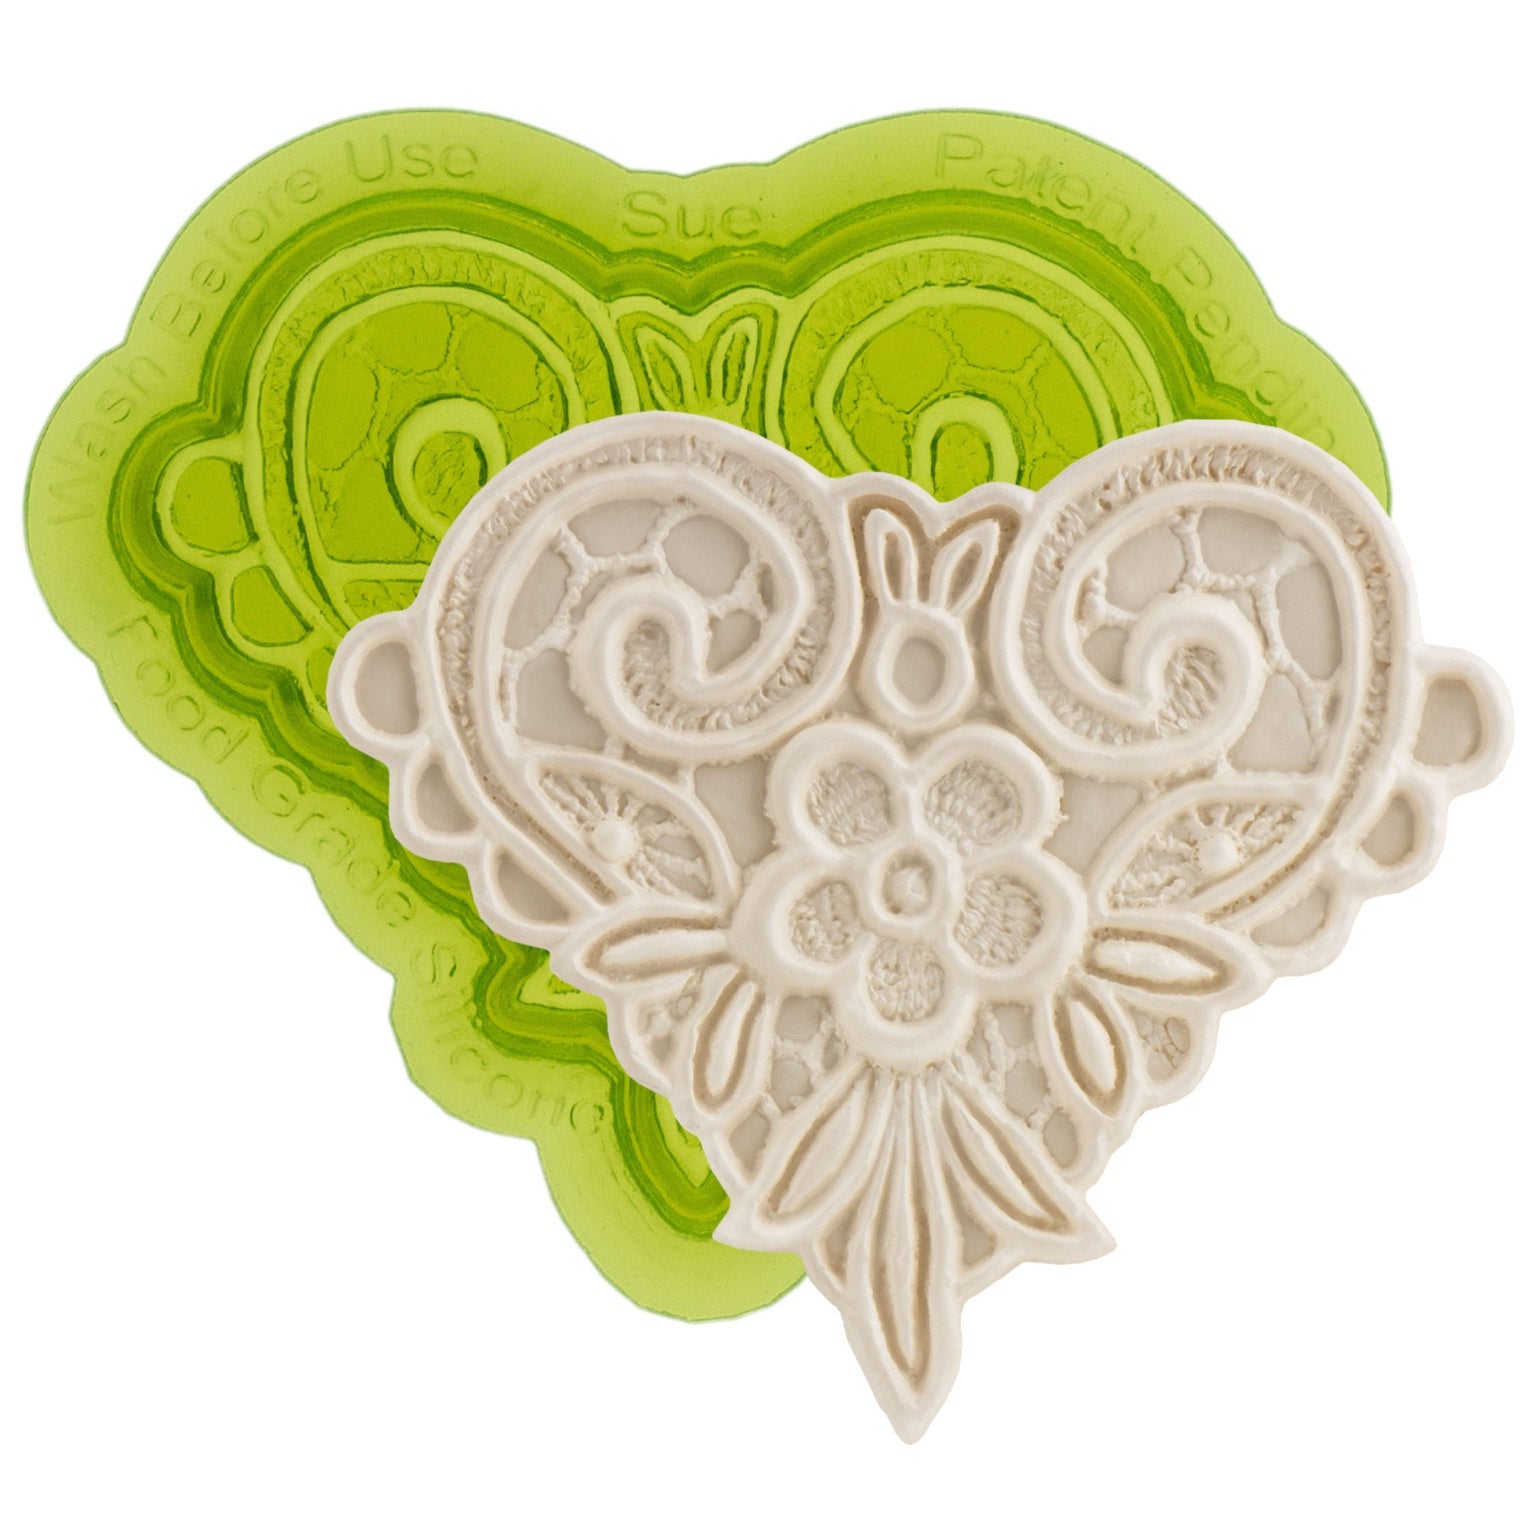 Marvelous Molds Silicone Lace Mold Lydia Cake Decorating with Fondant Gum Paste and Rolled Icing